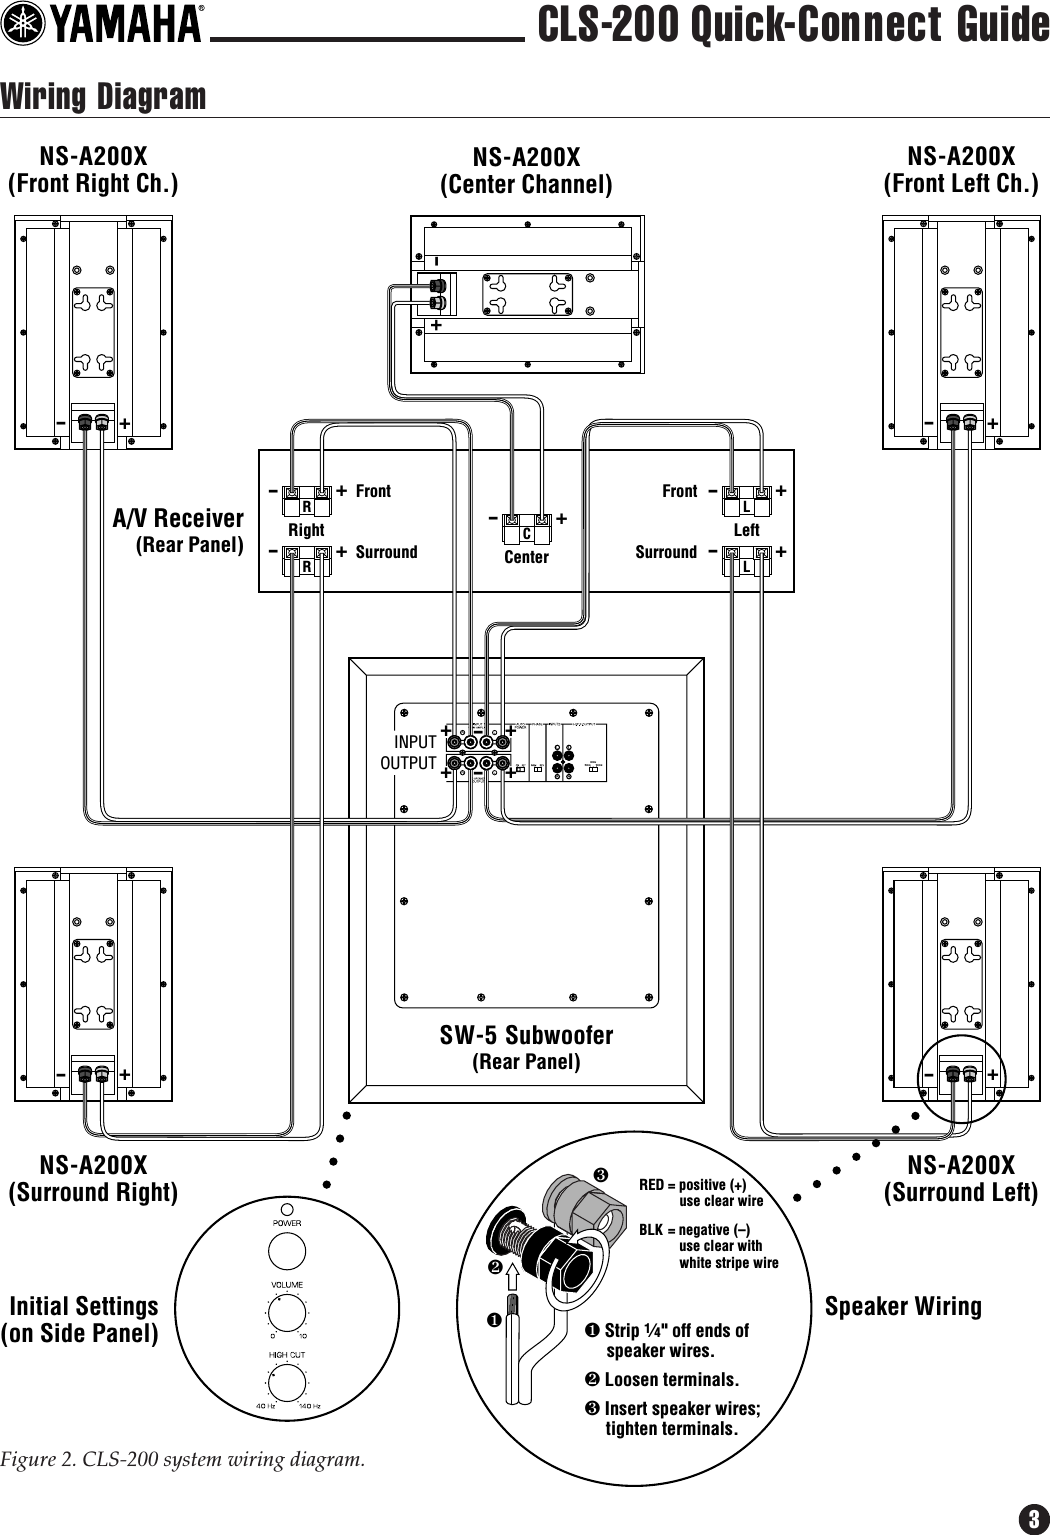 Page 3 of 4 - Yamaha CLS-200 Quick Connect Rev1 Connection Diagram CLS200QC